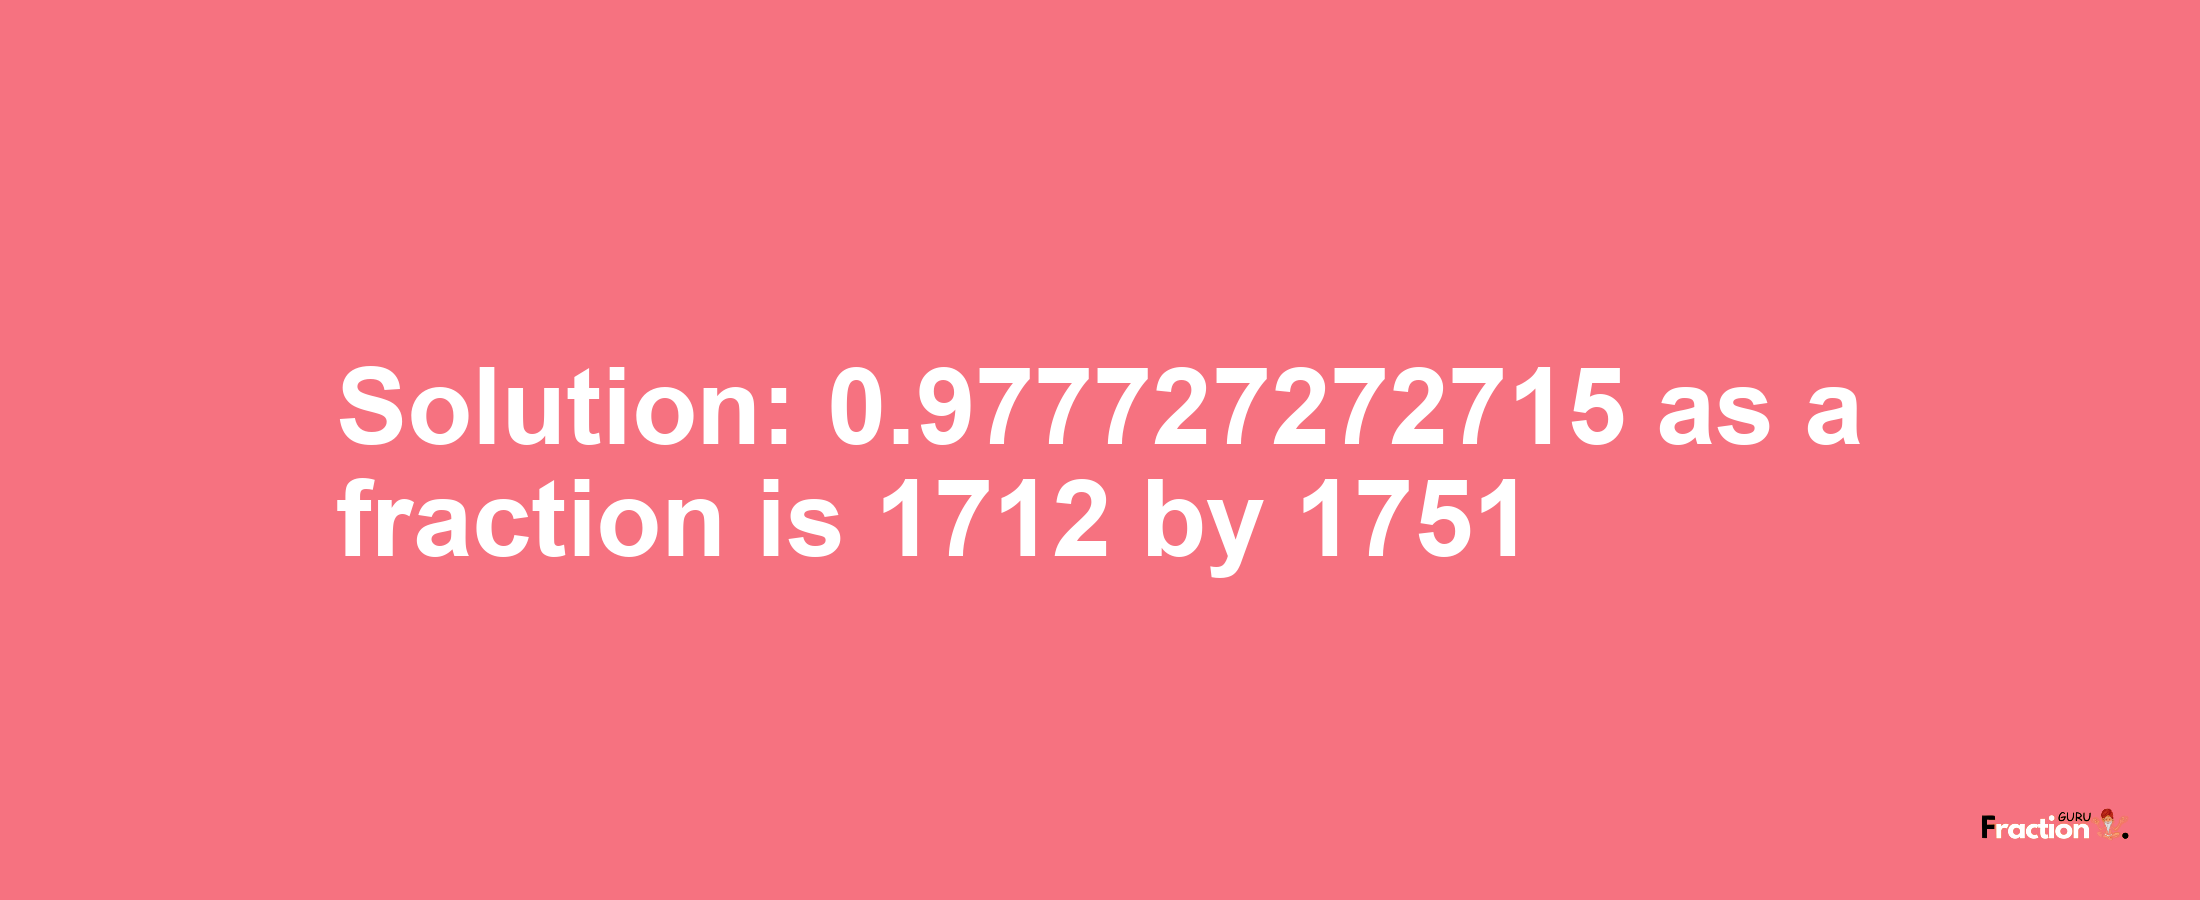 Solution:0.977727272715 as a fraction is 1712/1751